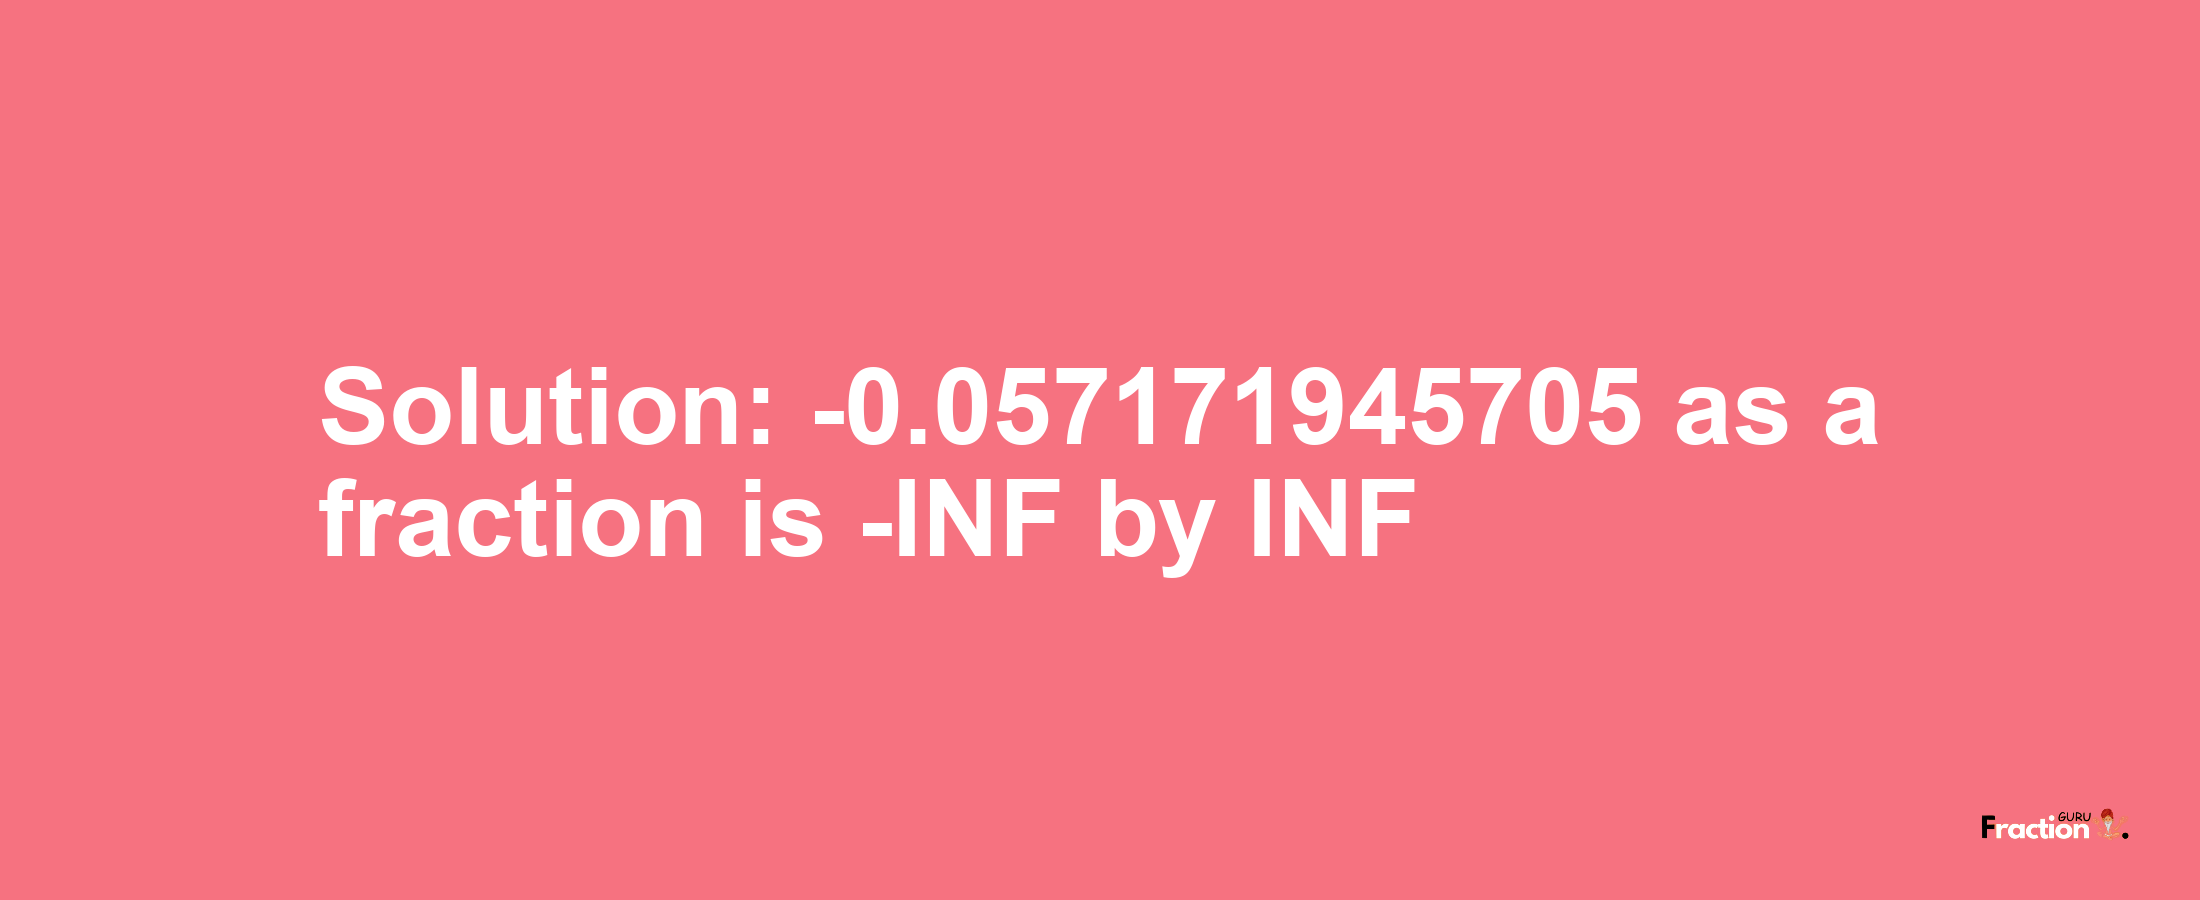 Solution:-0.057171945705 as a fraction is -INF/INF